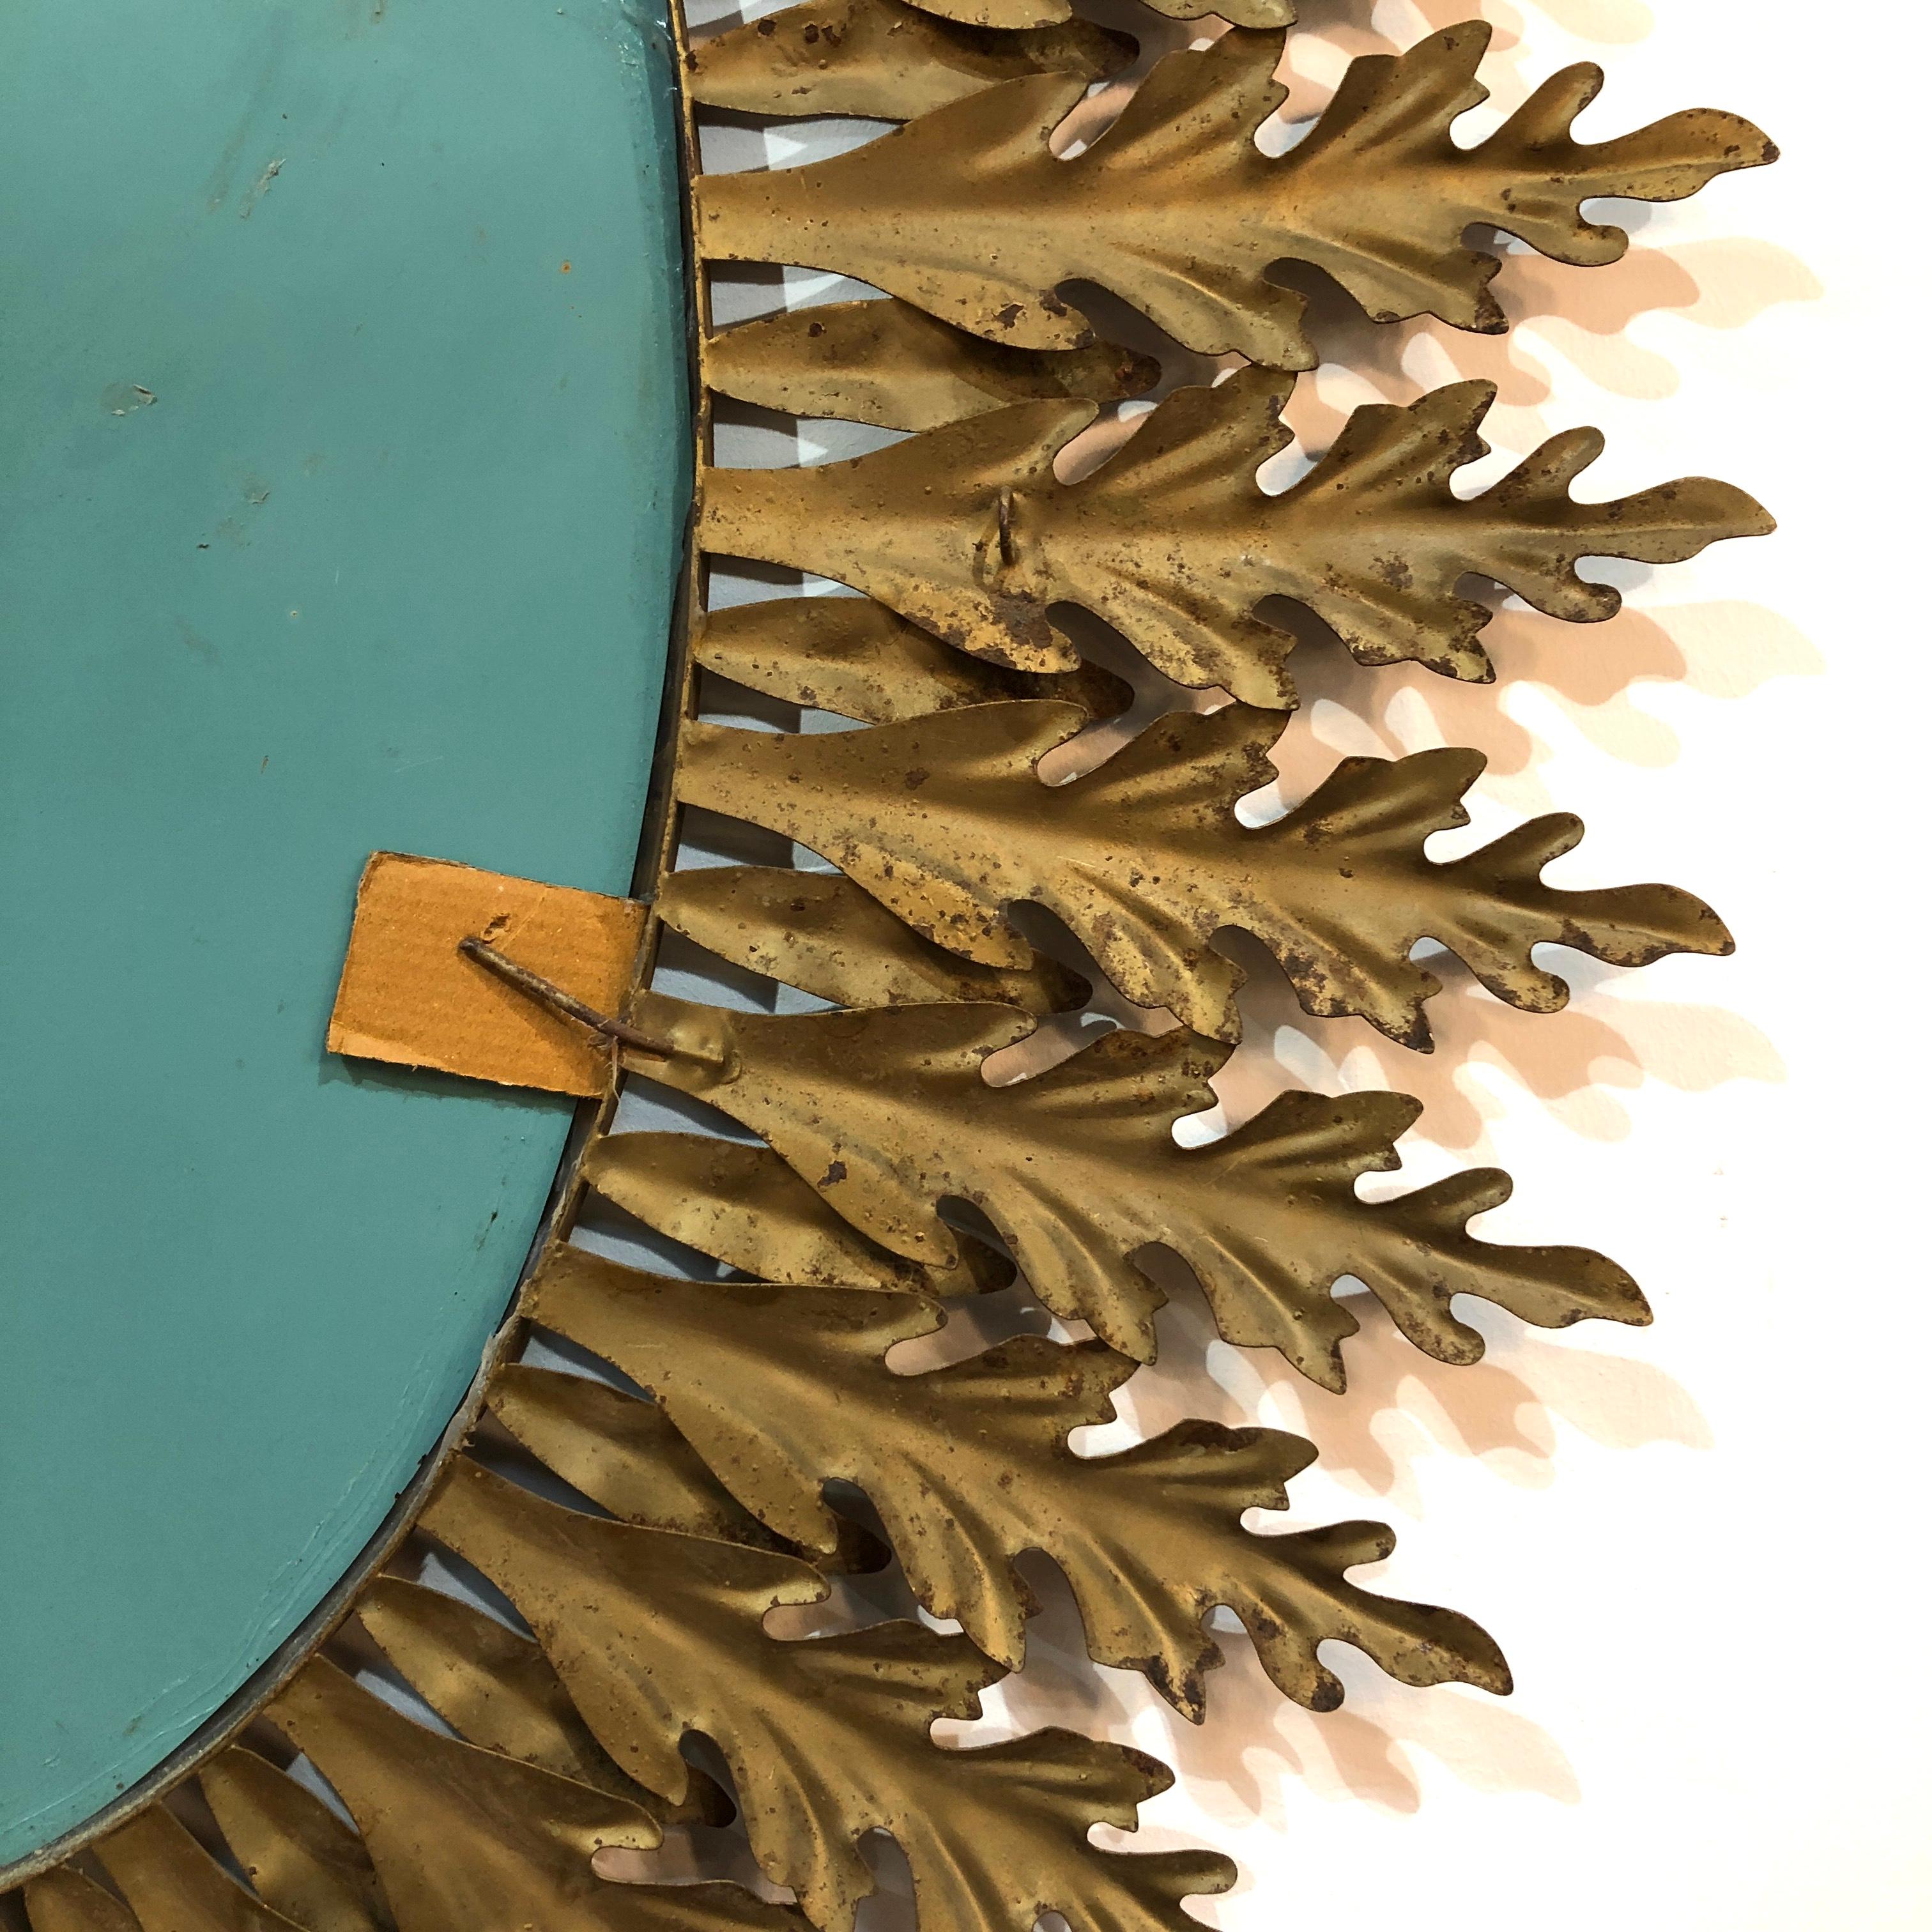 1950’s Italian large oval mirror features layers of Acanthus leaves cut from pressed aluminium into a starburst pattern. Very nice patina. An absolute thing of beauty.

Sourced in Paris

H 98cm, W 78cm
Mirror plate H 57cm, W 35cm

Please contact us